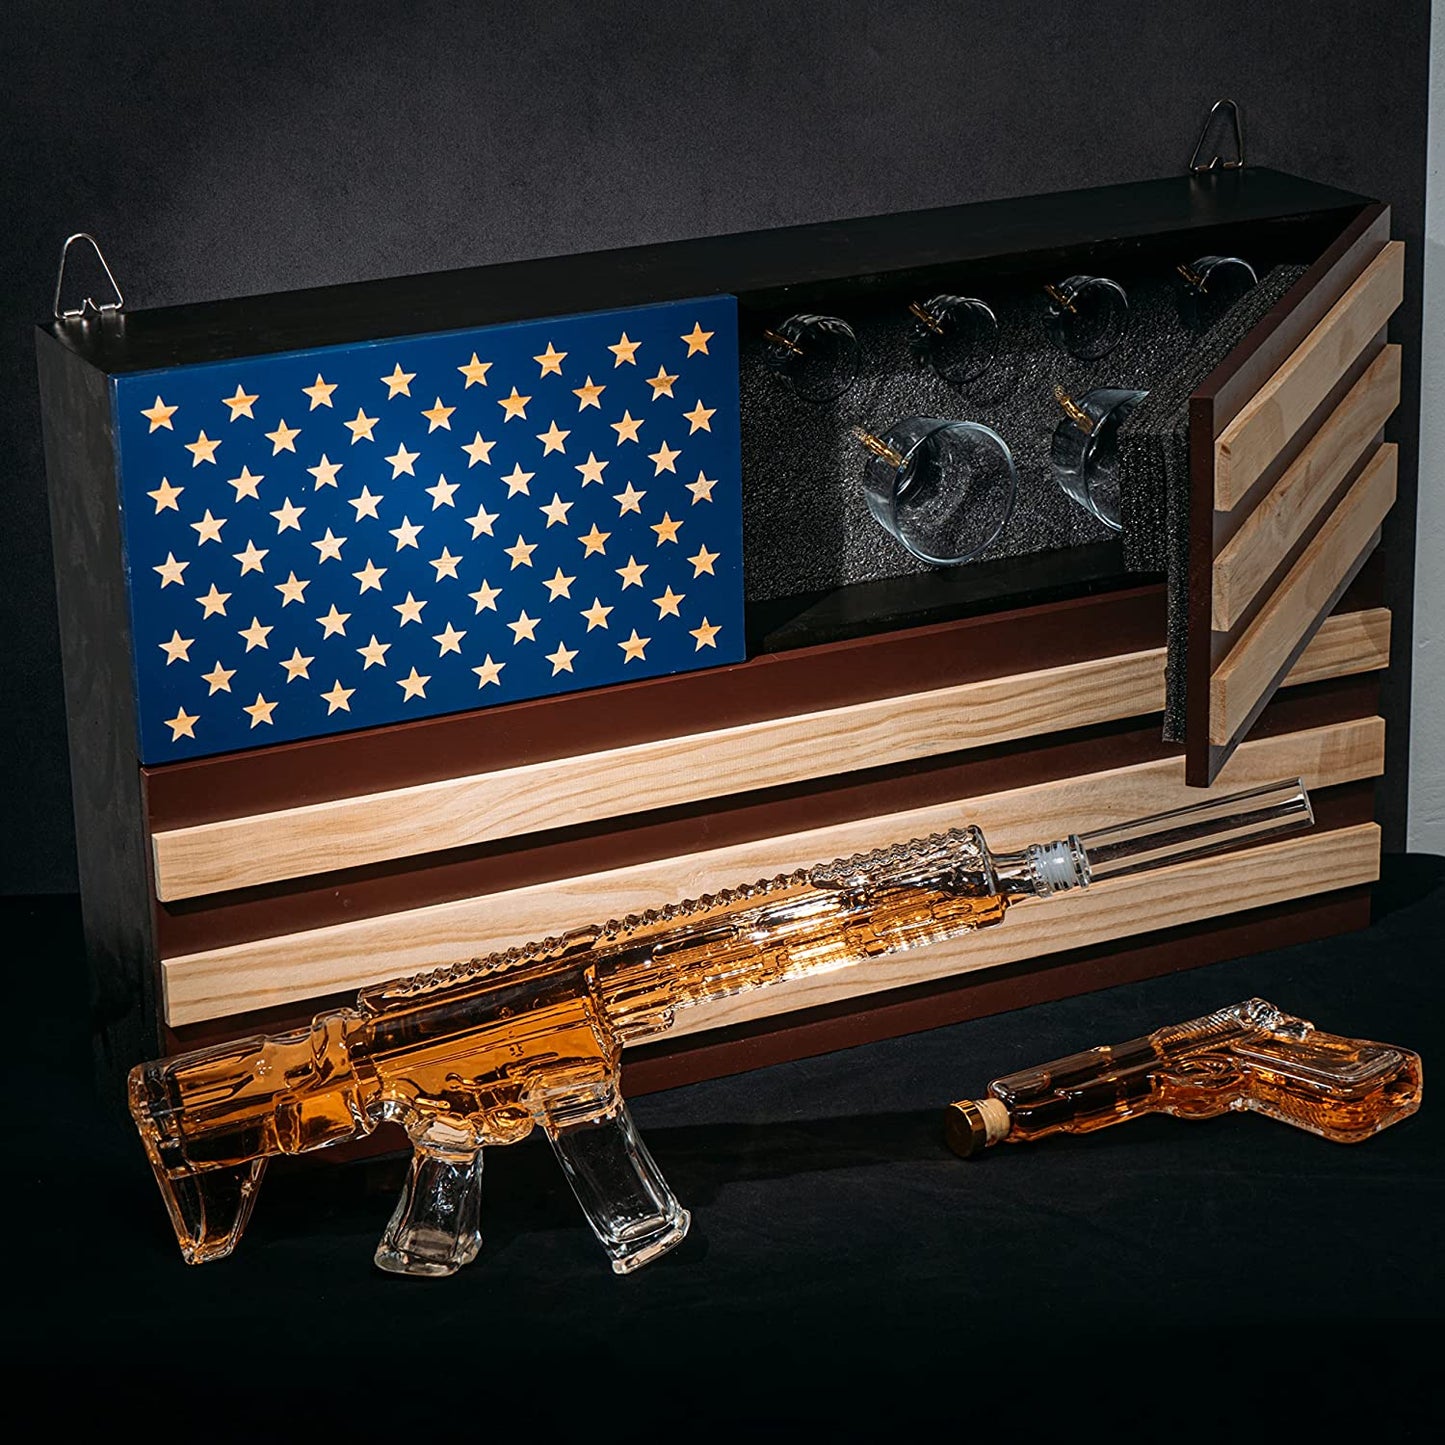 Pistol & AR15 Whiskey Decanter Set of 2 on Hidden Storage American Flag Wall Rack by The Wine Savant with 4 Bullet Shot Glasses & 2 Bullet Whiskey Glasses - Veteran Gifts, Military Gift, Home Bar Gift-5